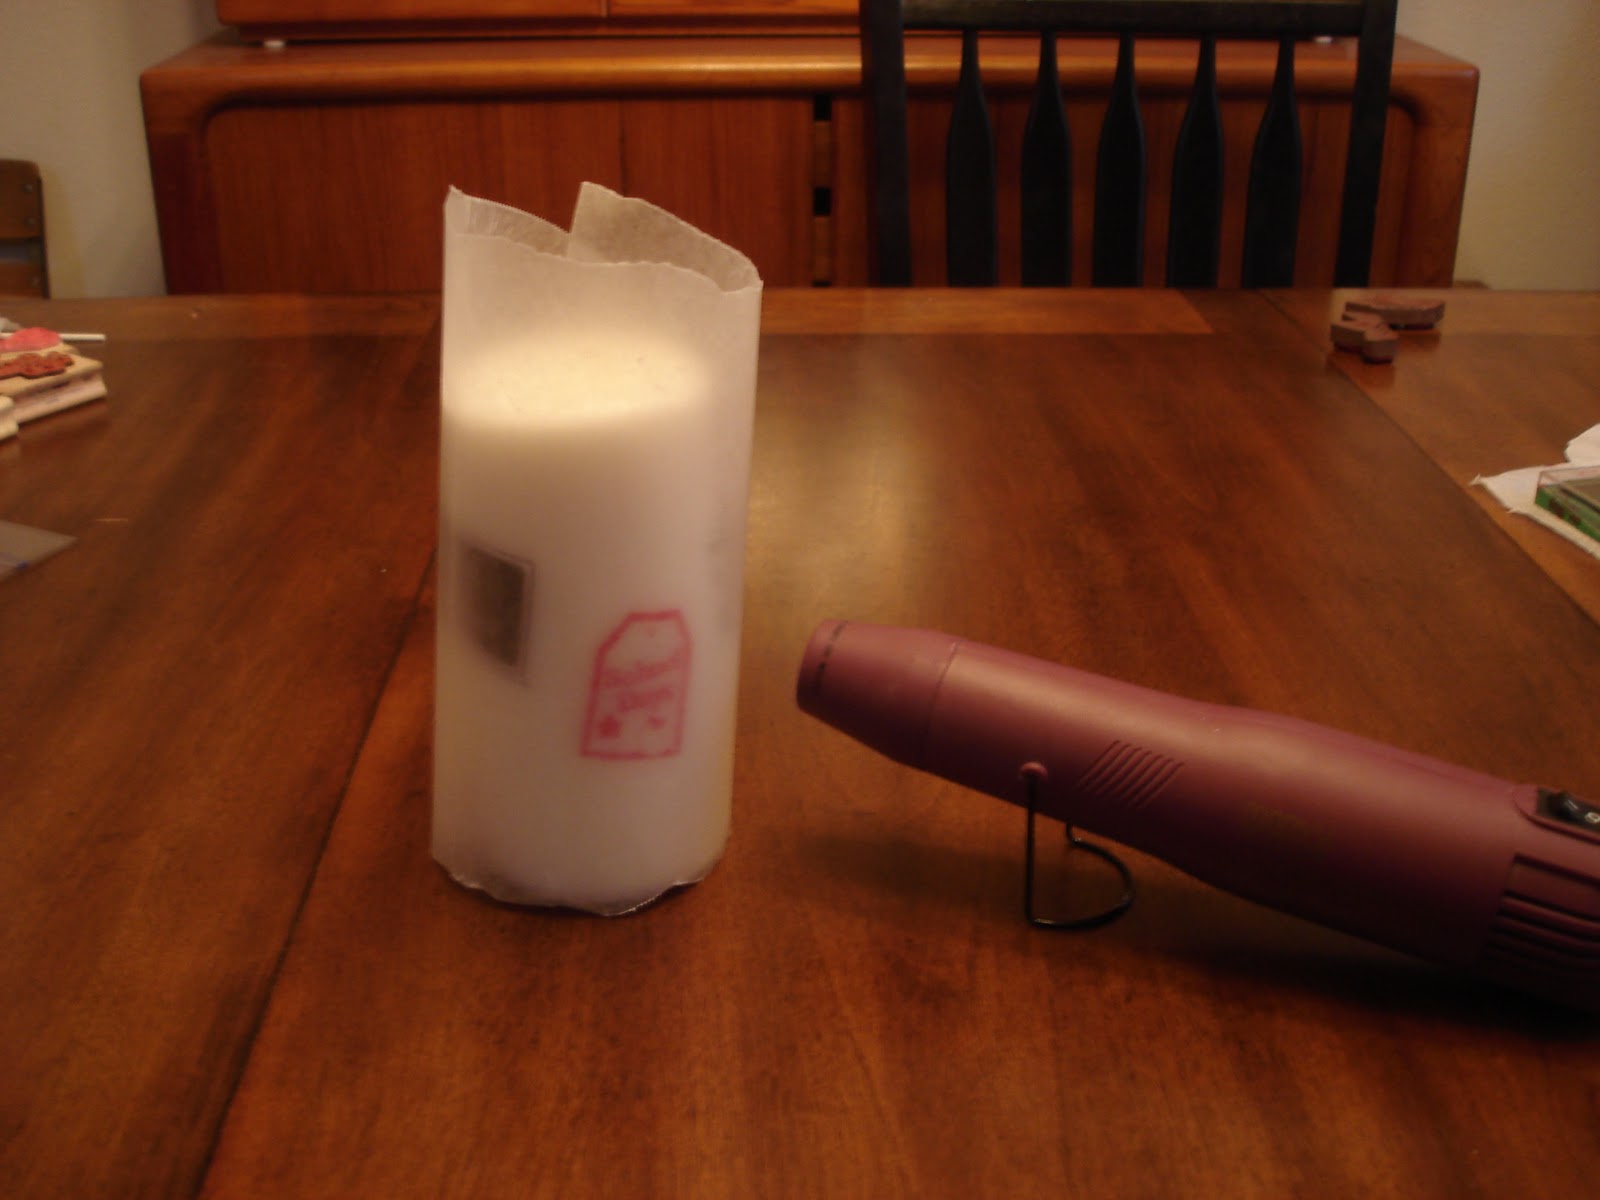 Next, wrap the wax paper around the candle and hold it firmly in place